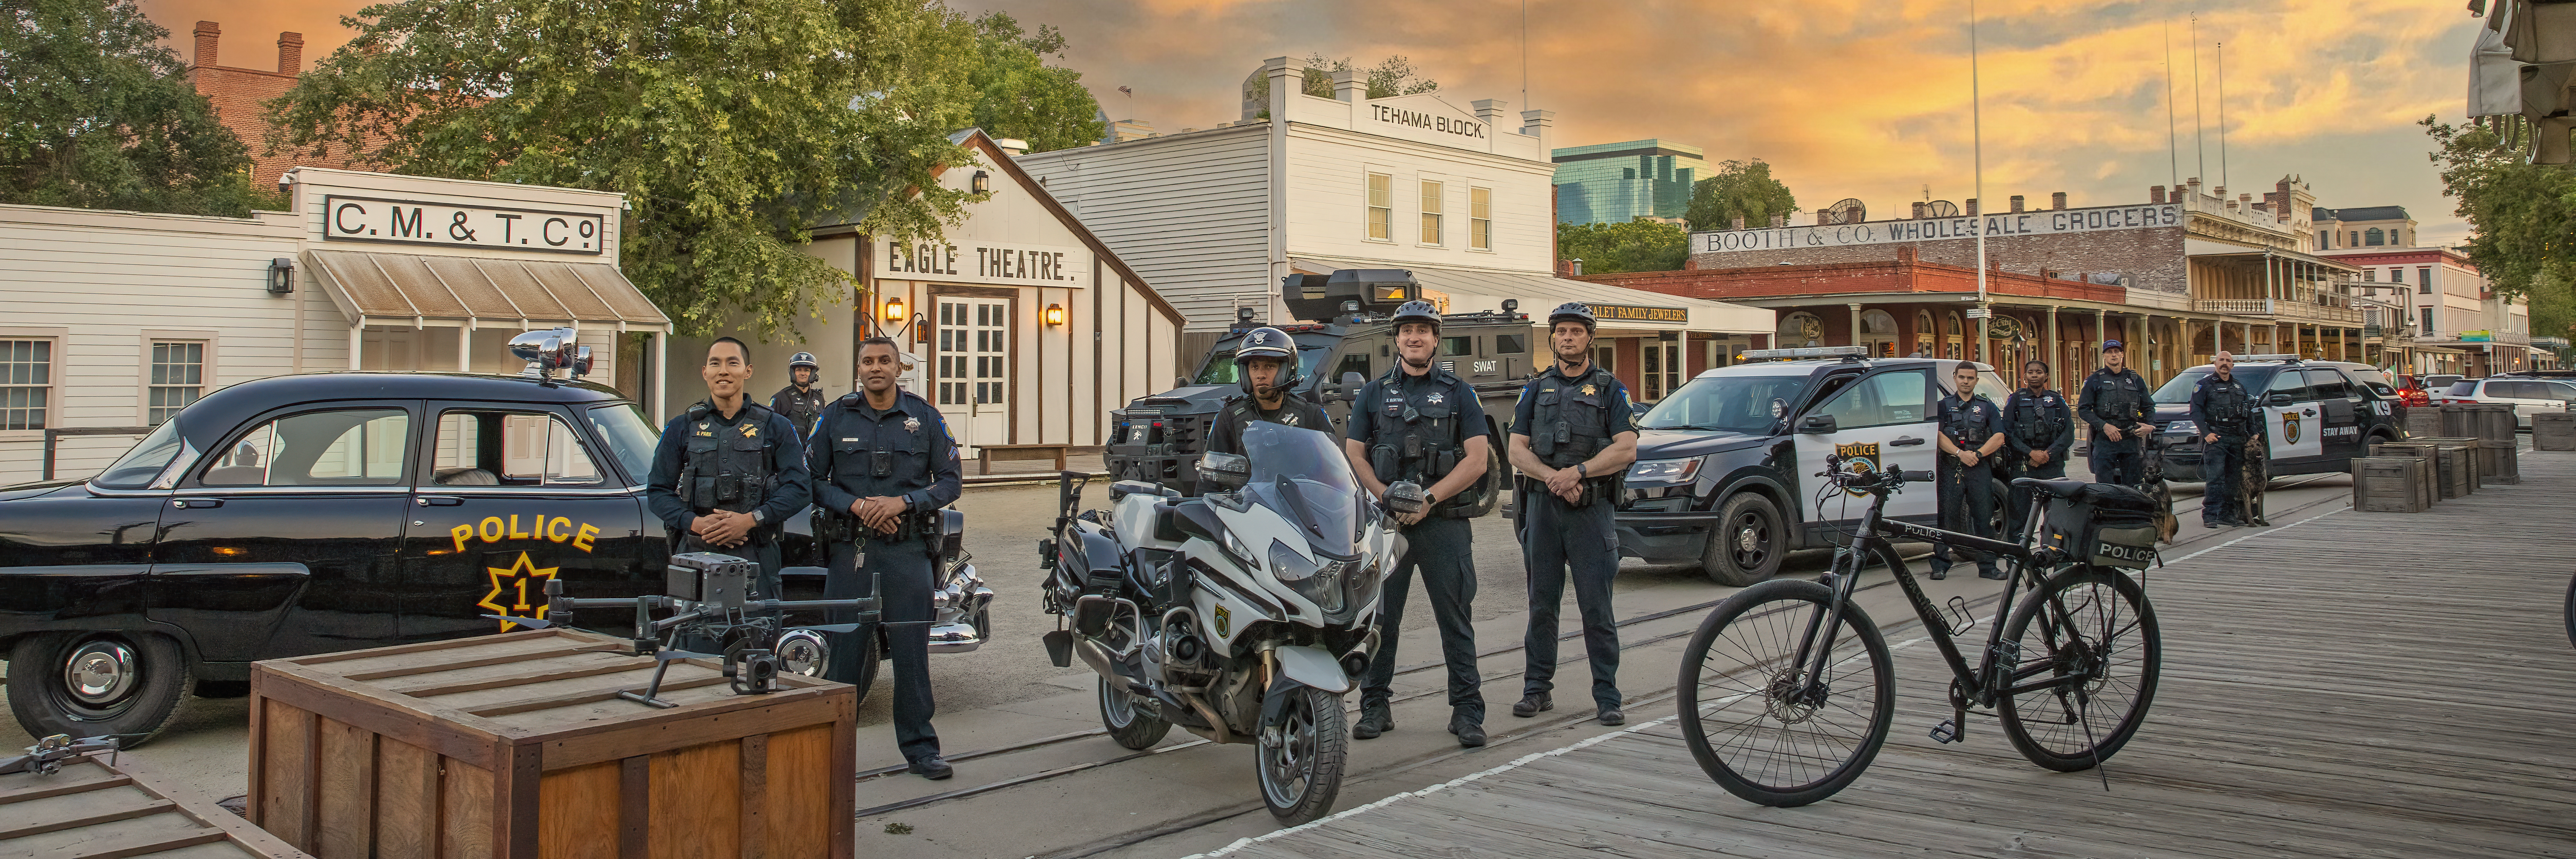 Photograph of police equipment and police officers outside in Old Sacramento